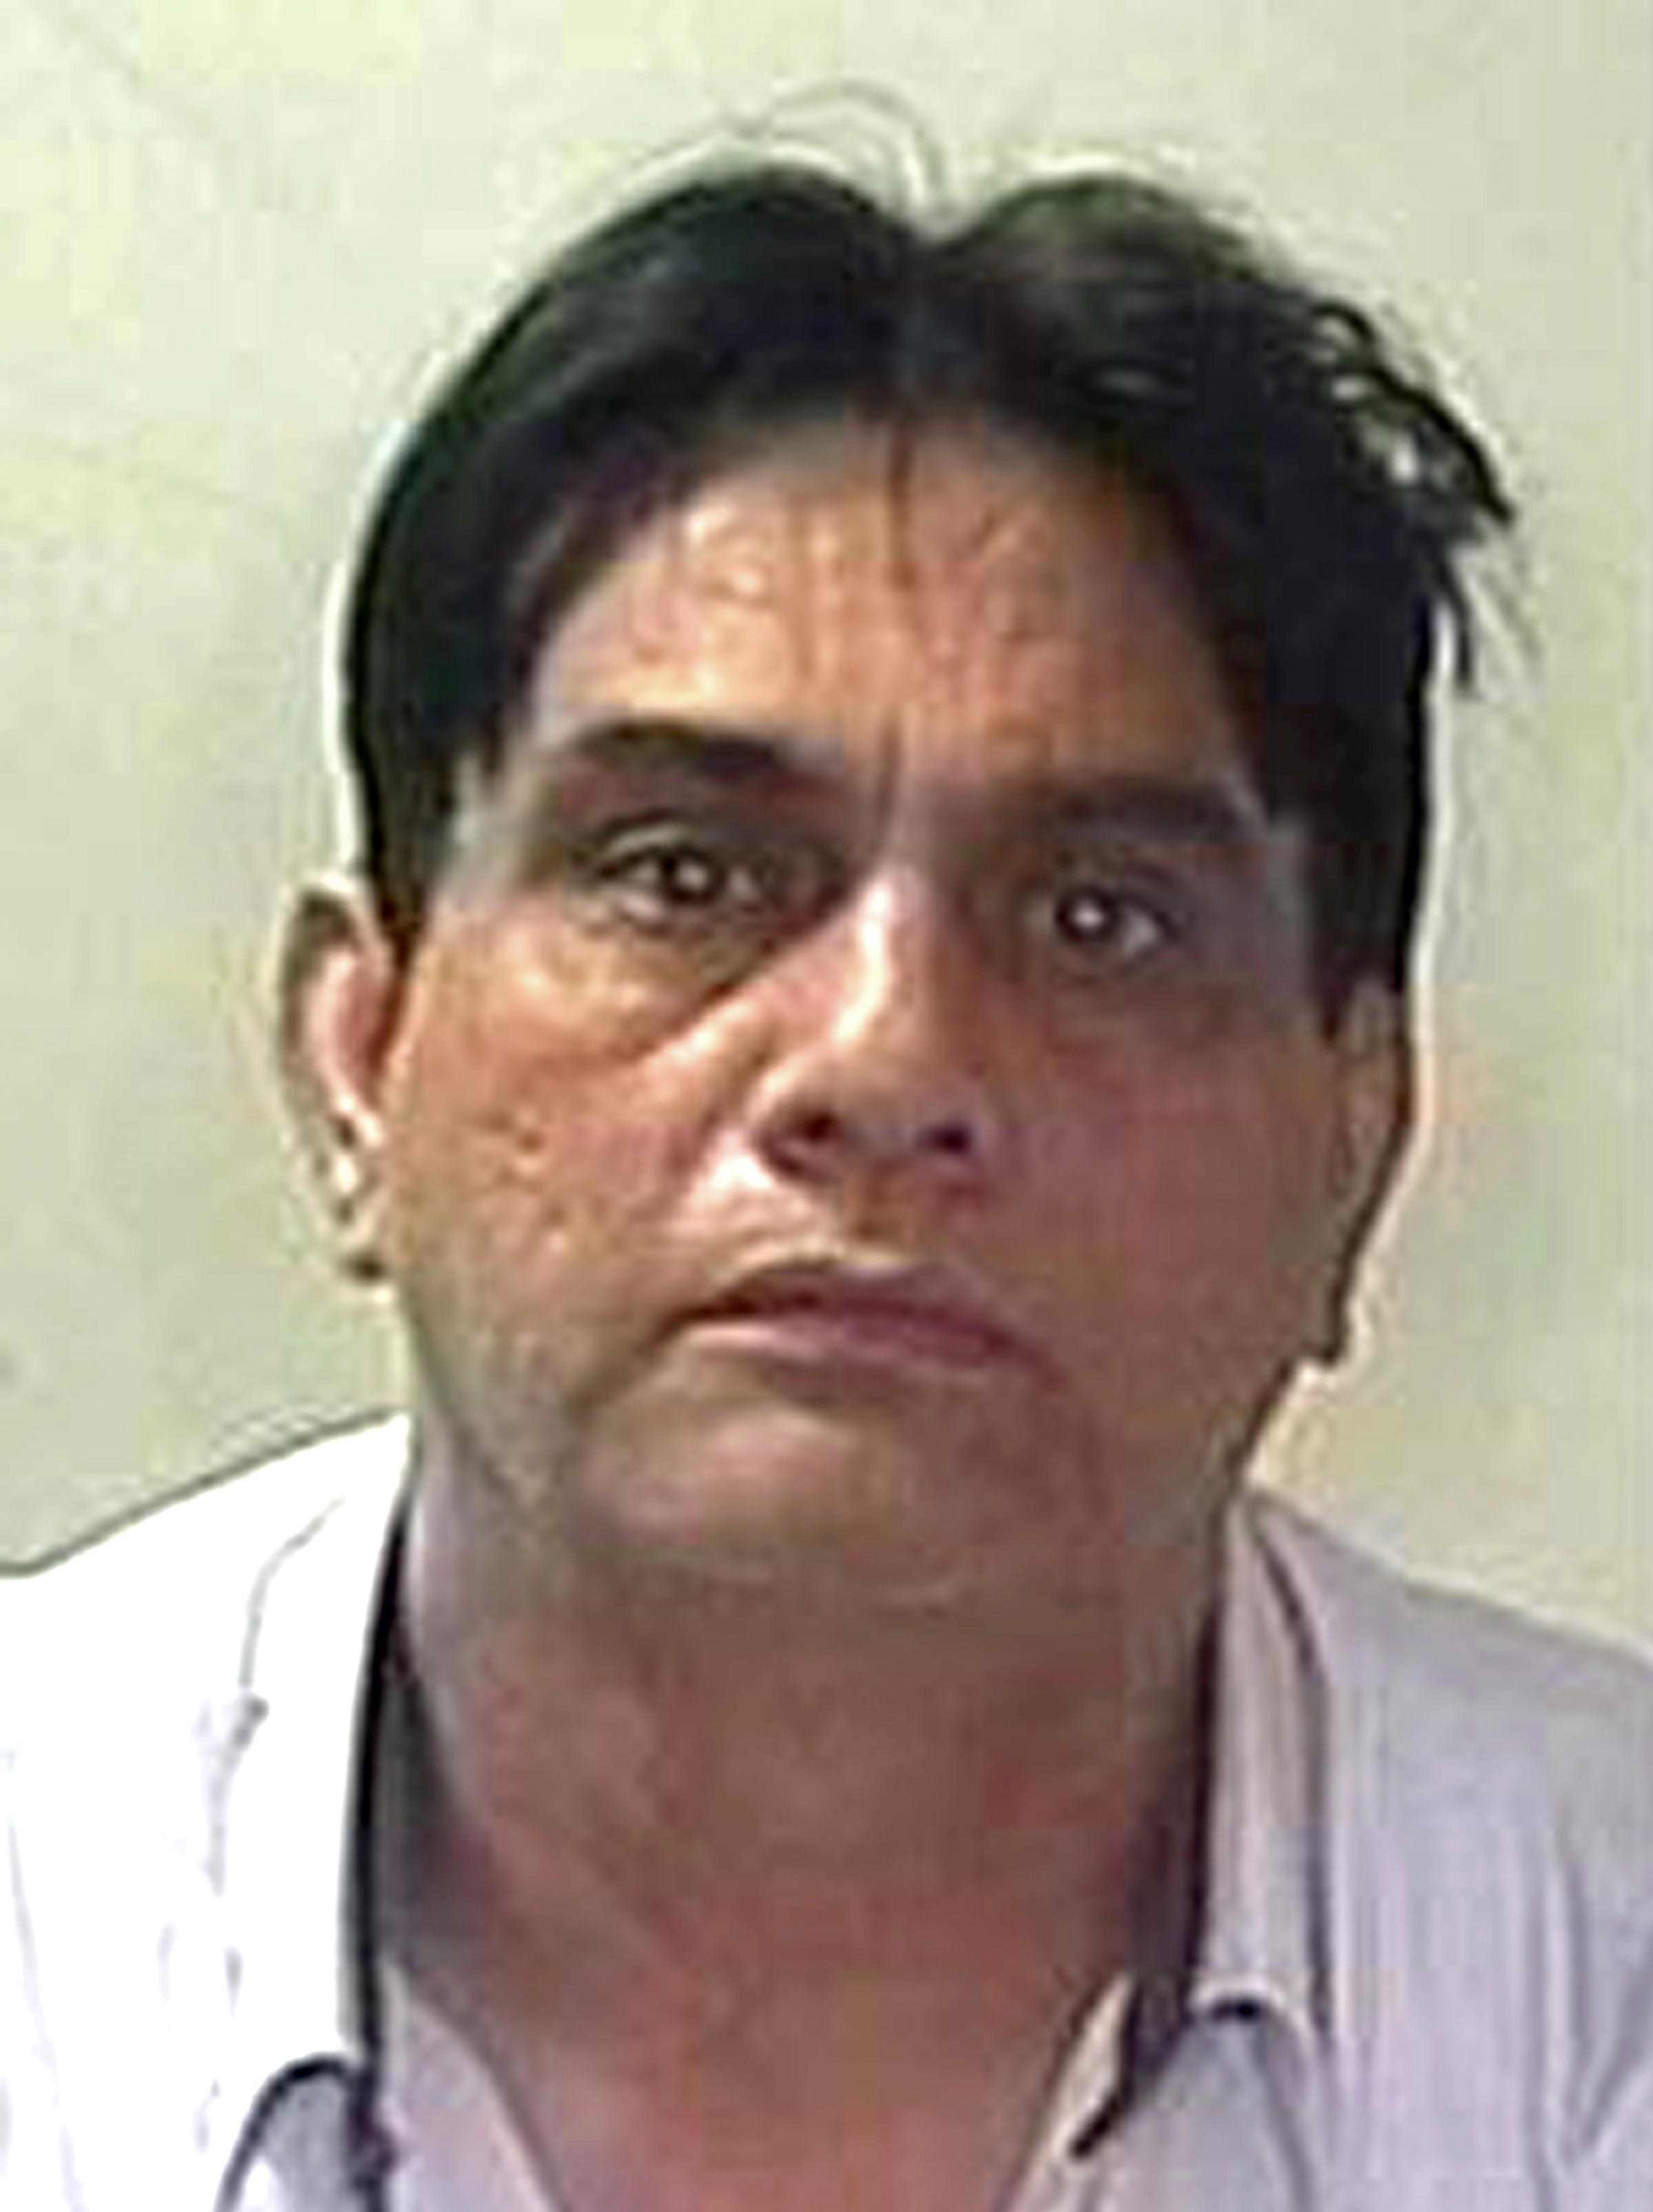 JAILED: <b>Mohammed Akhtar</b> who helped his son flee - 3499090